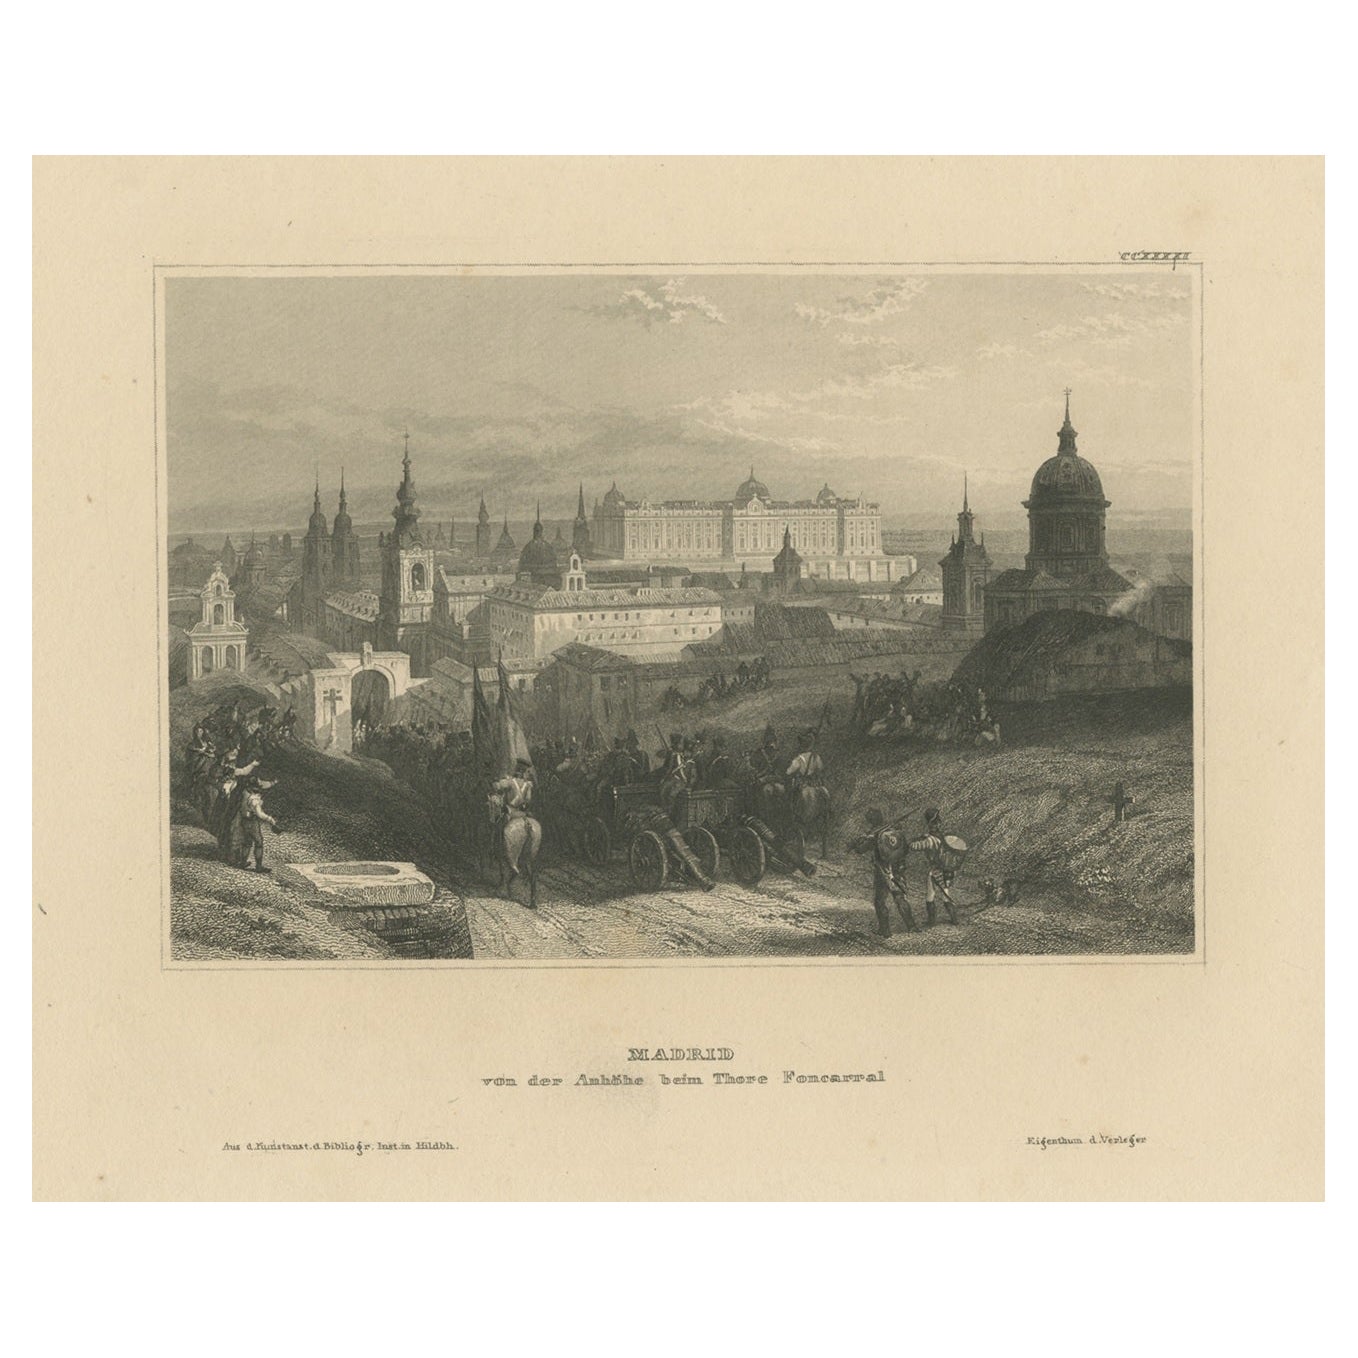 Antique Print of the City of Madrid, seen from Calle Fuencarral, Spain